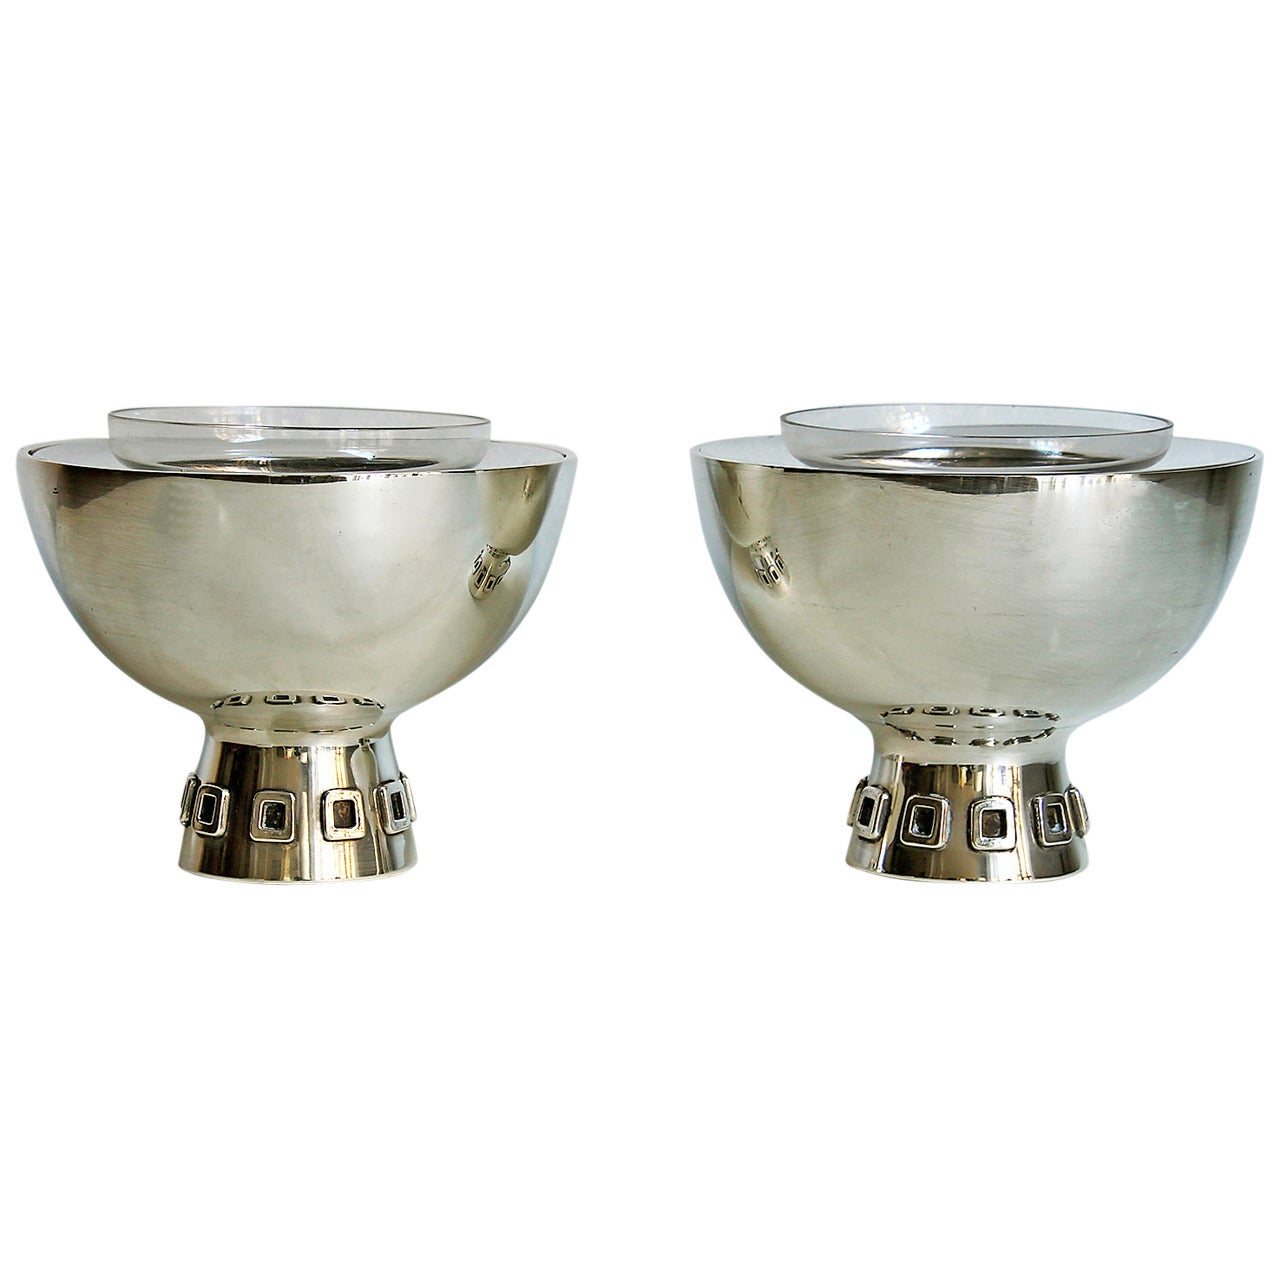 Pair of Mid-Century Modern Silver Caviar Bowls by Puig Doria - Spain For Sale